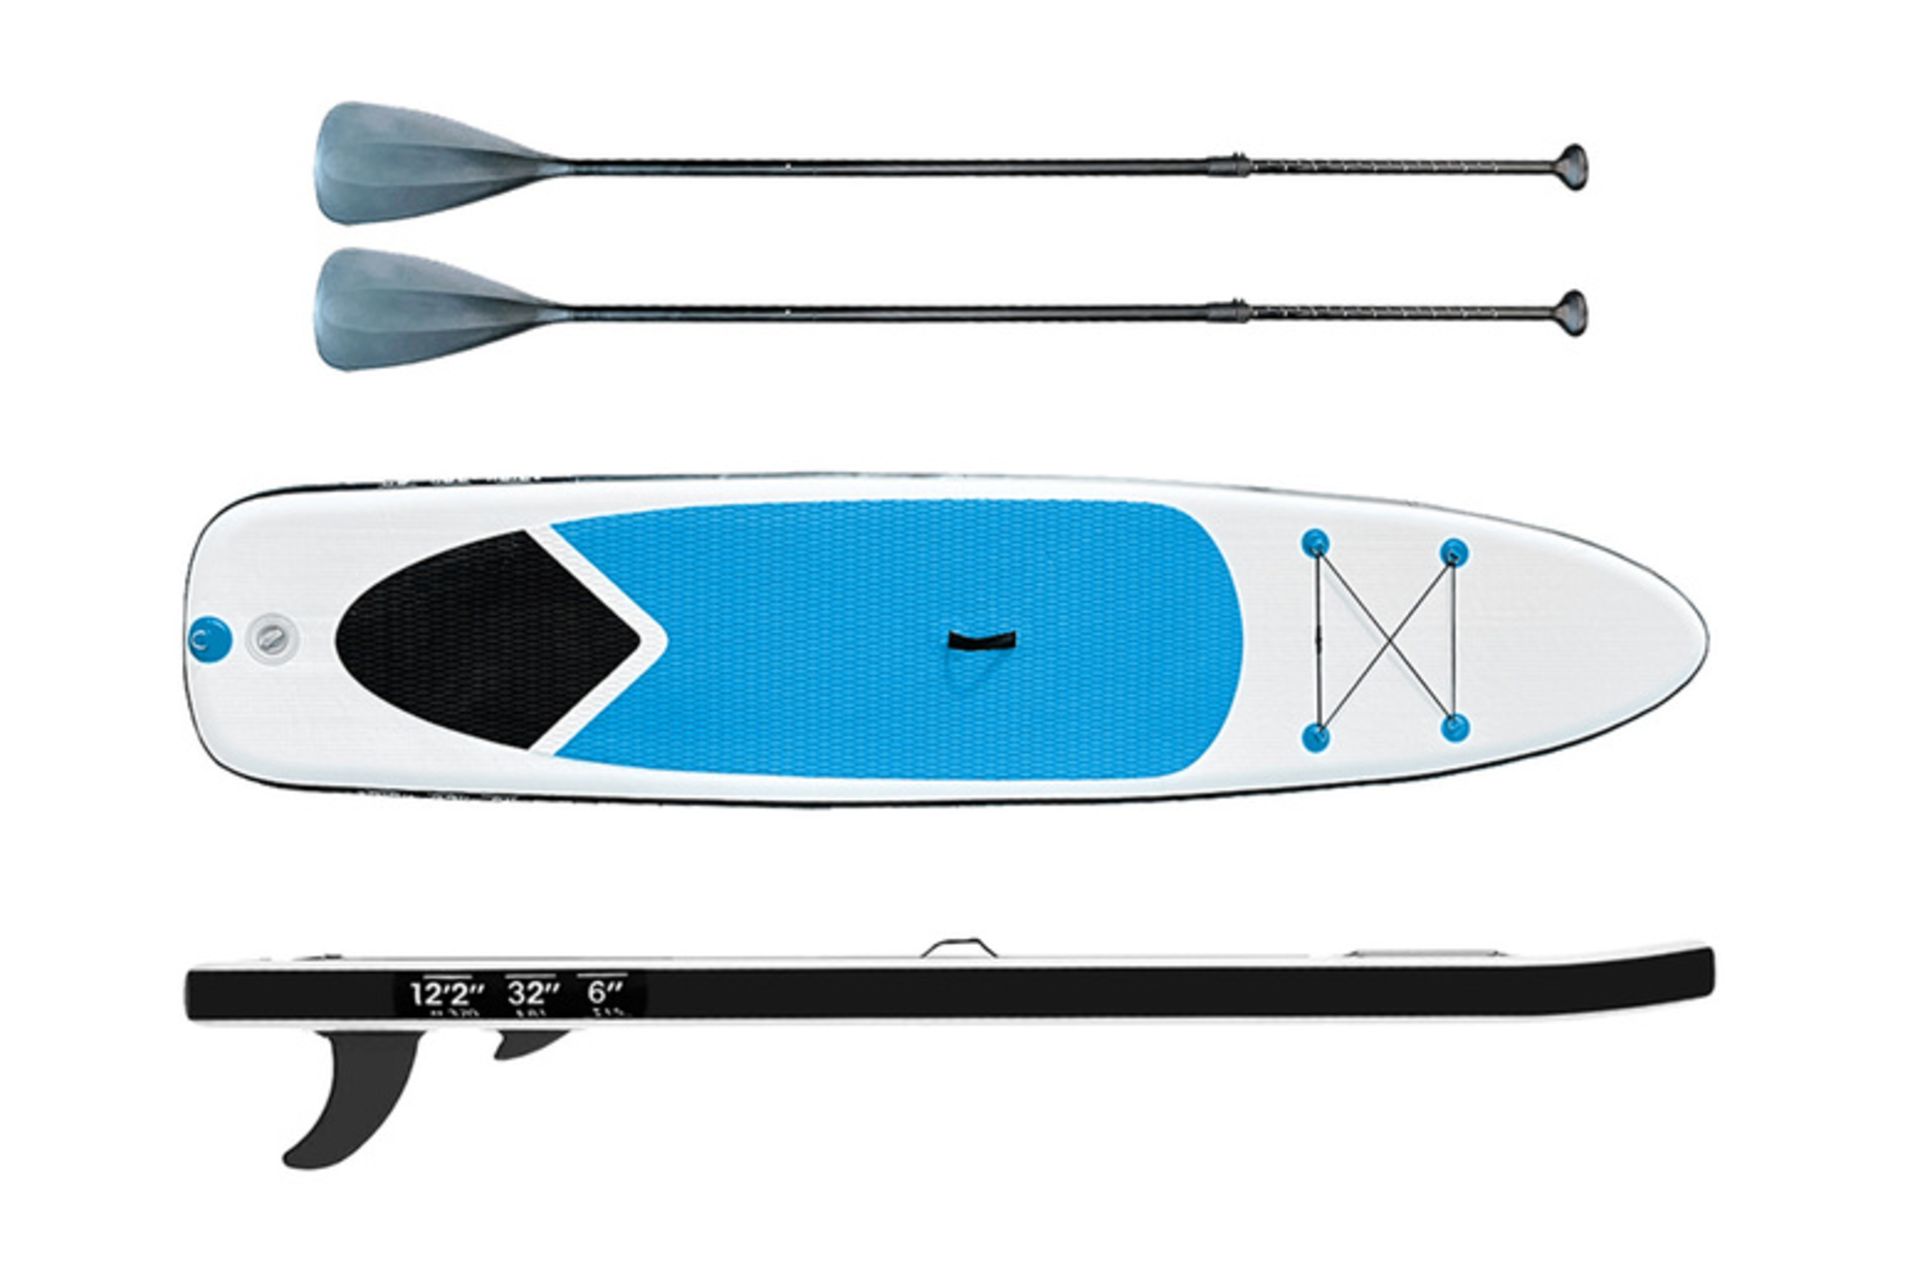 FREE DELIVERY - LARGE 2-PERSON INFLATABLE PADDLE BOARD W/ ACCESSORIES - BLUE